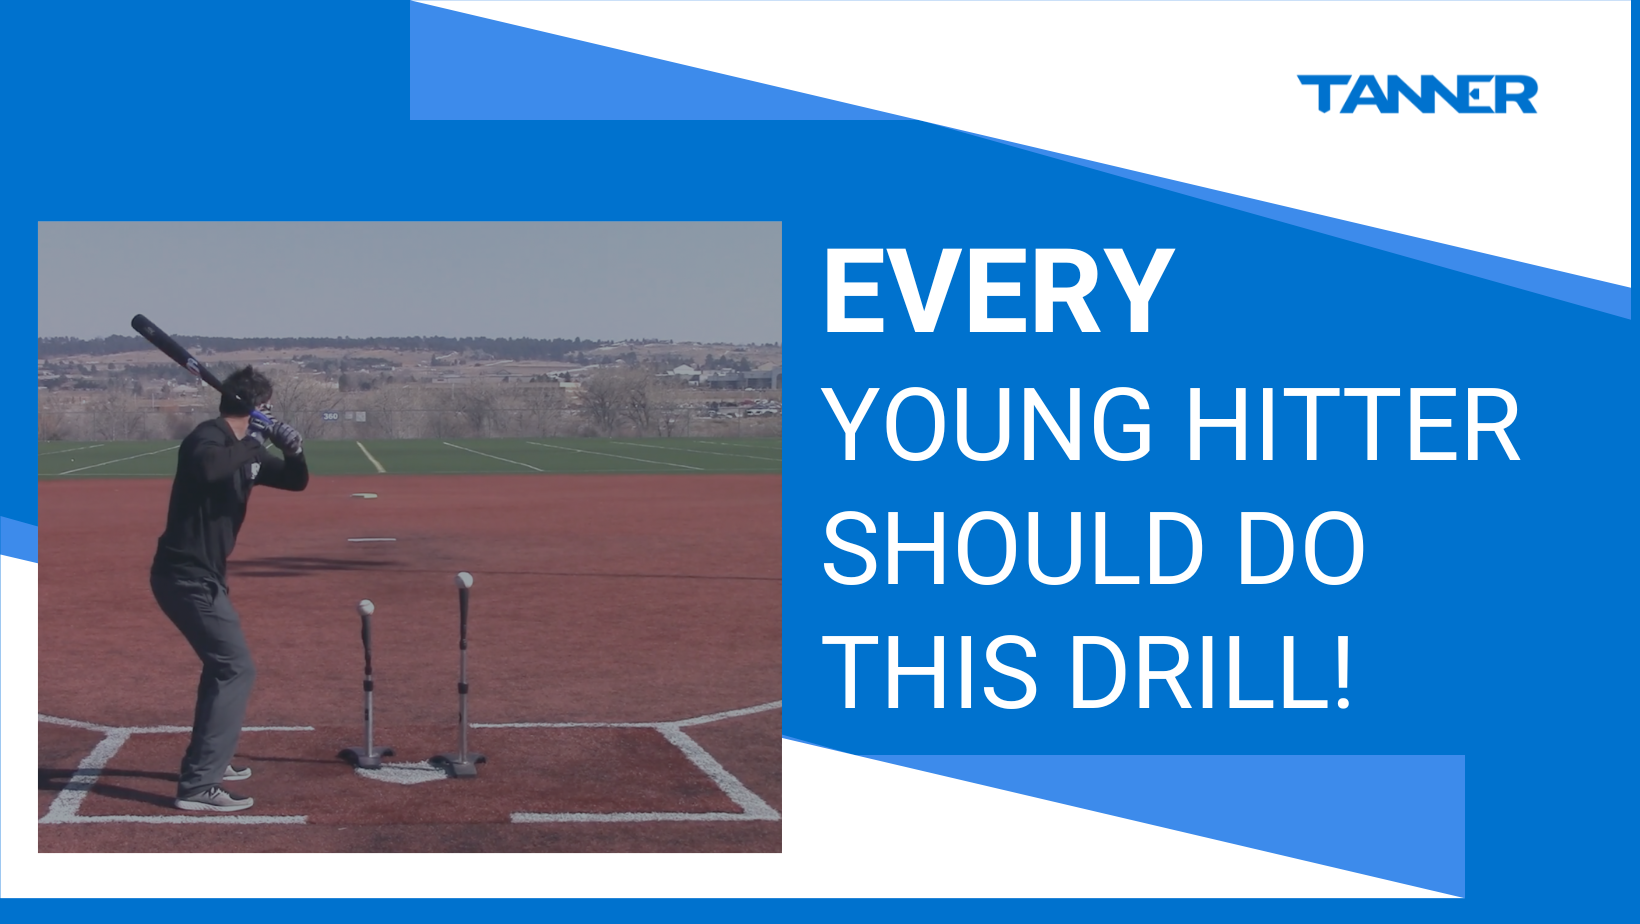 The Alternating Tee Drill - One of Our Favorite Baseball and Softball Hitting Drills